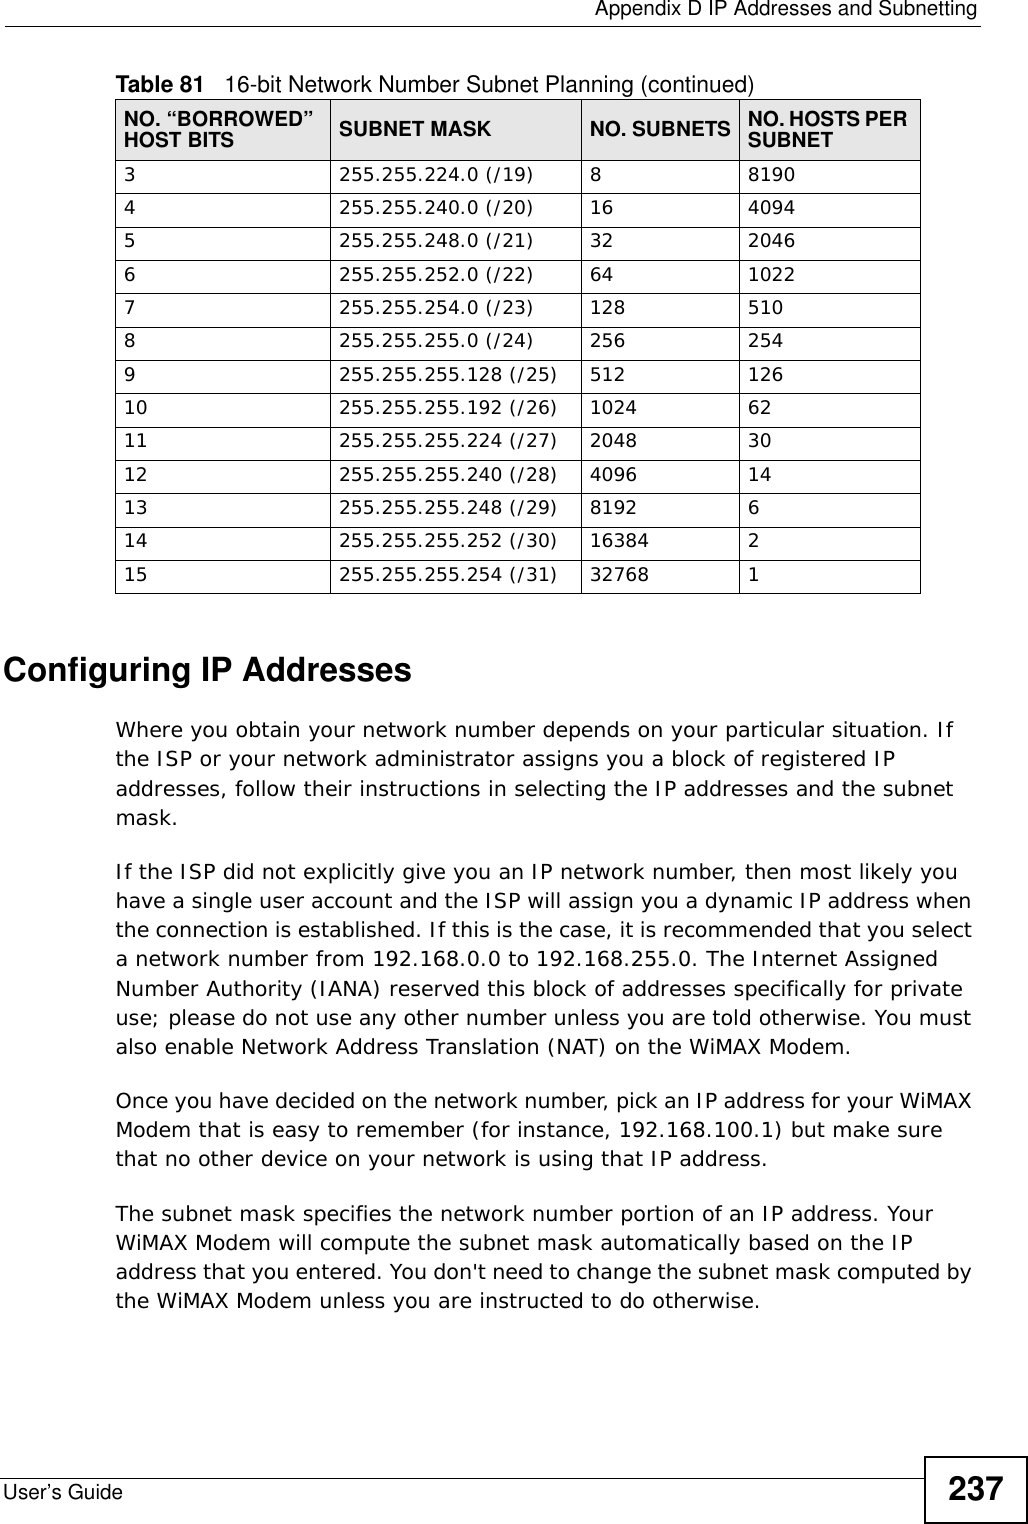  Appendix D IP Addresses and SubnettingUser’s Guide 237Configuring IP AddressesWhere you obtain your network number depends on your particular situation. If the ISP or your network administrator assigns you a block of registered IP addresses, follow their instructions in selecting the IP addresses and the subnet mask.If the ISP did not explicitly give you an IP network number, then most likely you have a single user account and the ISP will assign you a dynamic IP address when the connection is established. If this is the case, it is recommended that you select a network number from 192.168.0.0 to 192.168.255.0. The Internet Assigned Number Authority (IANA) reserved this block of addresses specifically for private use; please do not use any other number unless you are told otherwise. You must also enable Network Address Translation (NAT) on the WiMAX Modem. Once you have decided on the network number, pick an IP address for your WiMAX Modem that is easy to remember (for instance, 192.168.100.1) but make sure that no other device on your network is using that IP address.The subnet mask specifies the network number portion of an IP address. Your WiMAX Modem will compute the subnet mask automatically based on the IP address that you entered. You don&apos;t need to change the subnet mask computed by the WiMAX Modem unless you are instructed to do otherwise.3255.255.224.0 (/19) 881904255.255.240.0 (/20) 16 40945255.255.248.0 (/21) 32 20466255.255.252.0 (/22) 64 10227255.255.254.0 (/23) 128 5108255.255.255.0 (/24) 256 2549255.255.255.128 (/25) 512 12610 255.255.255.192 (/26) 1024 6211 255.255.255.224 (/27) 2048 3012 255.255.255.240 (/28) 4096 1413 255.255.255.248 (/29) 8192 614 255.255.255.252 (/30) 16384 215 255.255.255.254 (/31) 32768 1Table 81   16-bit Network Number Subnet Planning (continued)NO. “BORROWED” HOST BITS SUBNET MASK NO. SUBNETS NO. HOSTS PER SUBNET